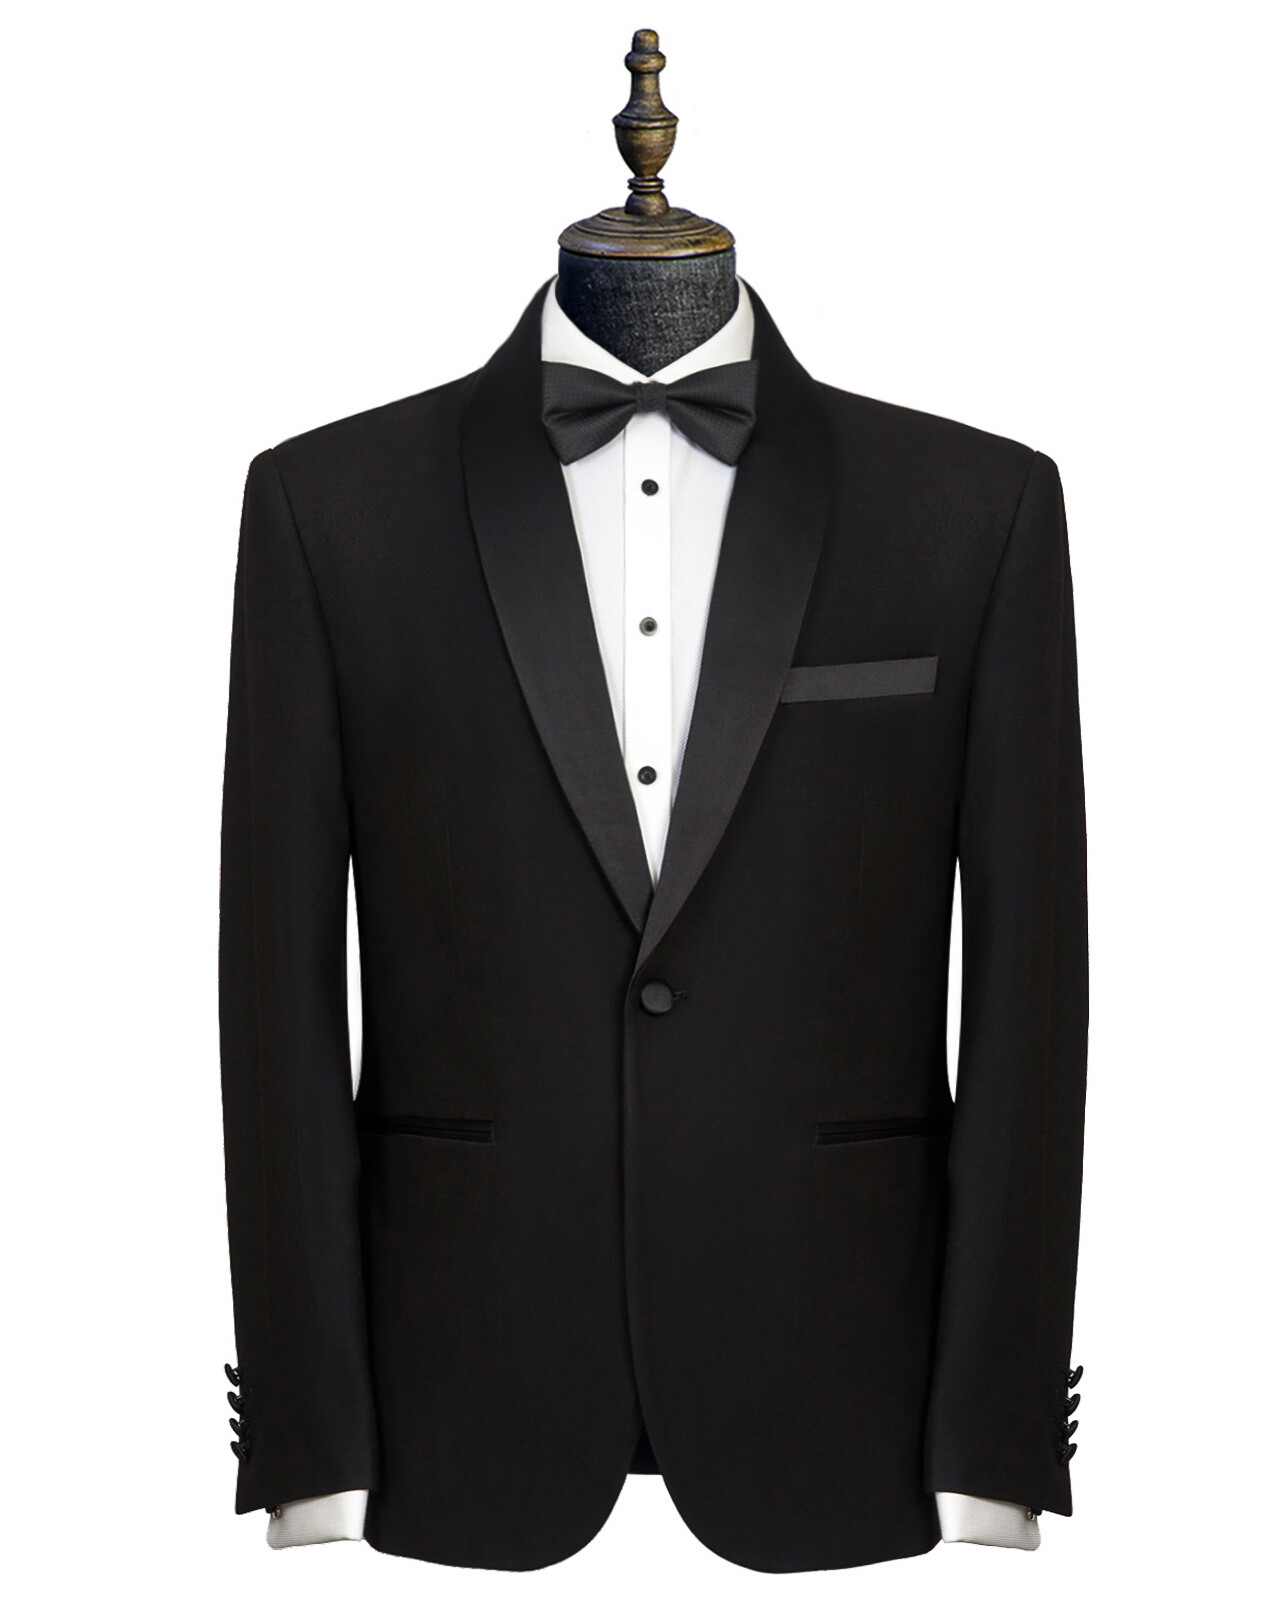 Entry level skinny-fit black tuxedo made from a non-wool fabric